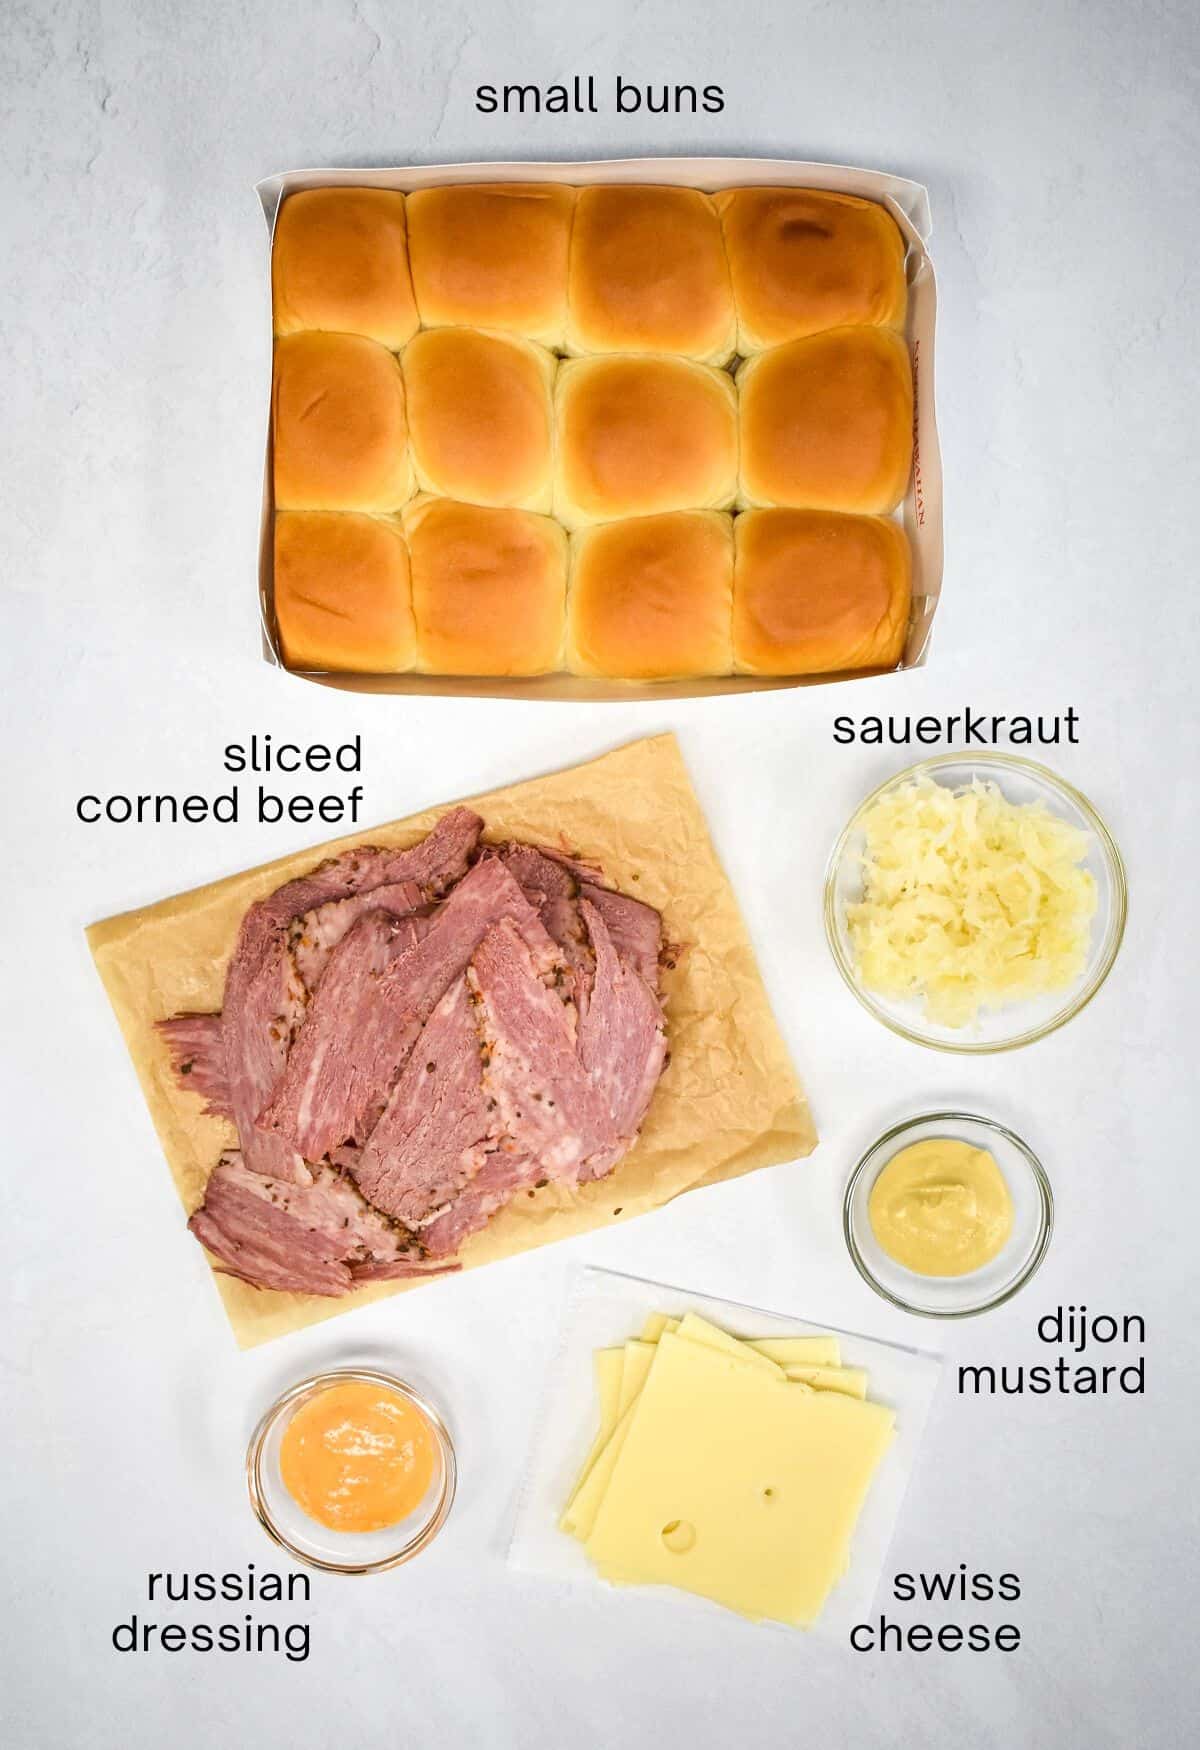 The ingredients for the sandwiches arranged on a white table with each labeled with the name in small, black letters.